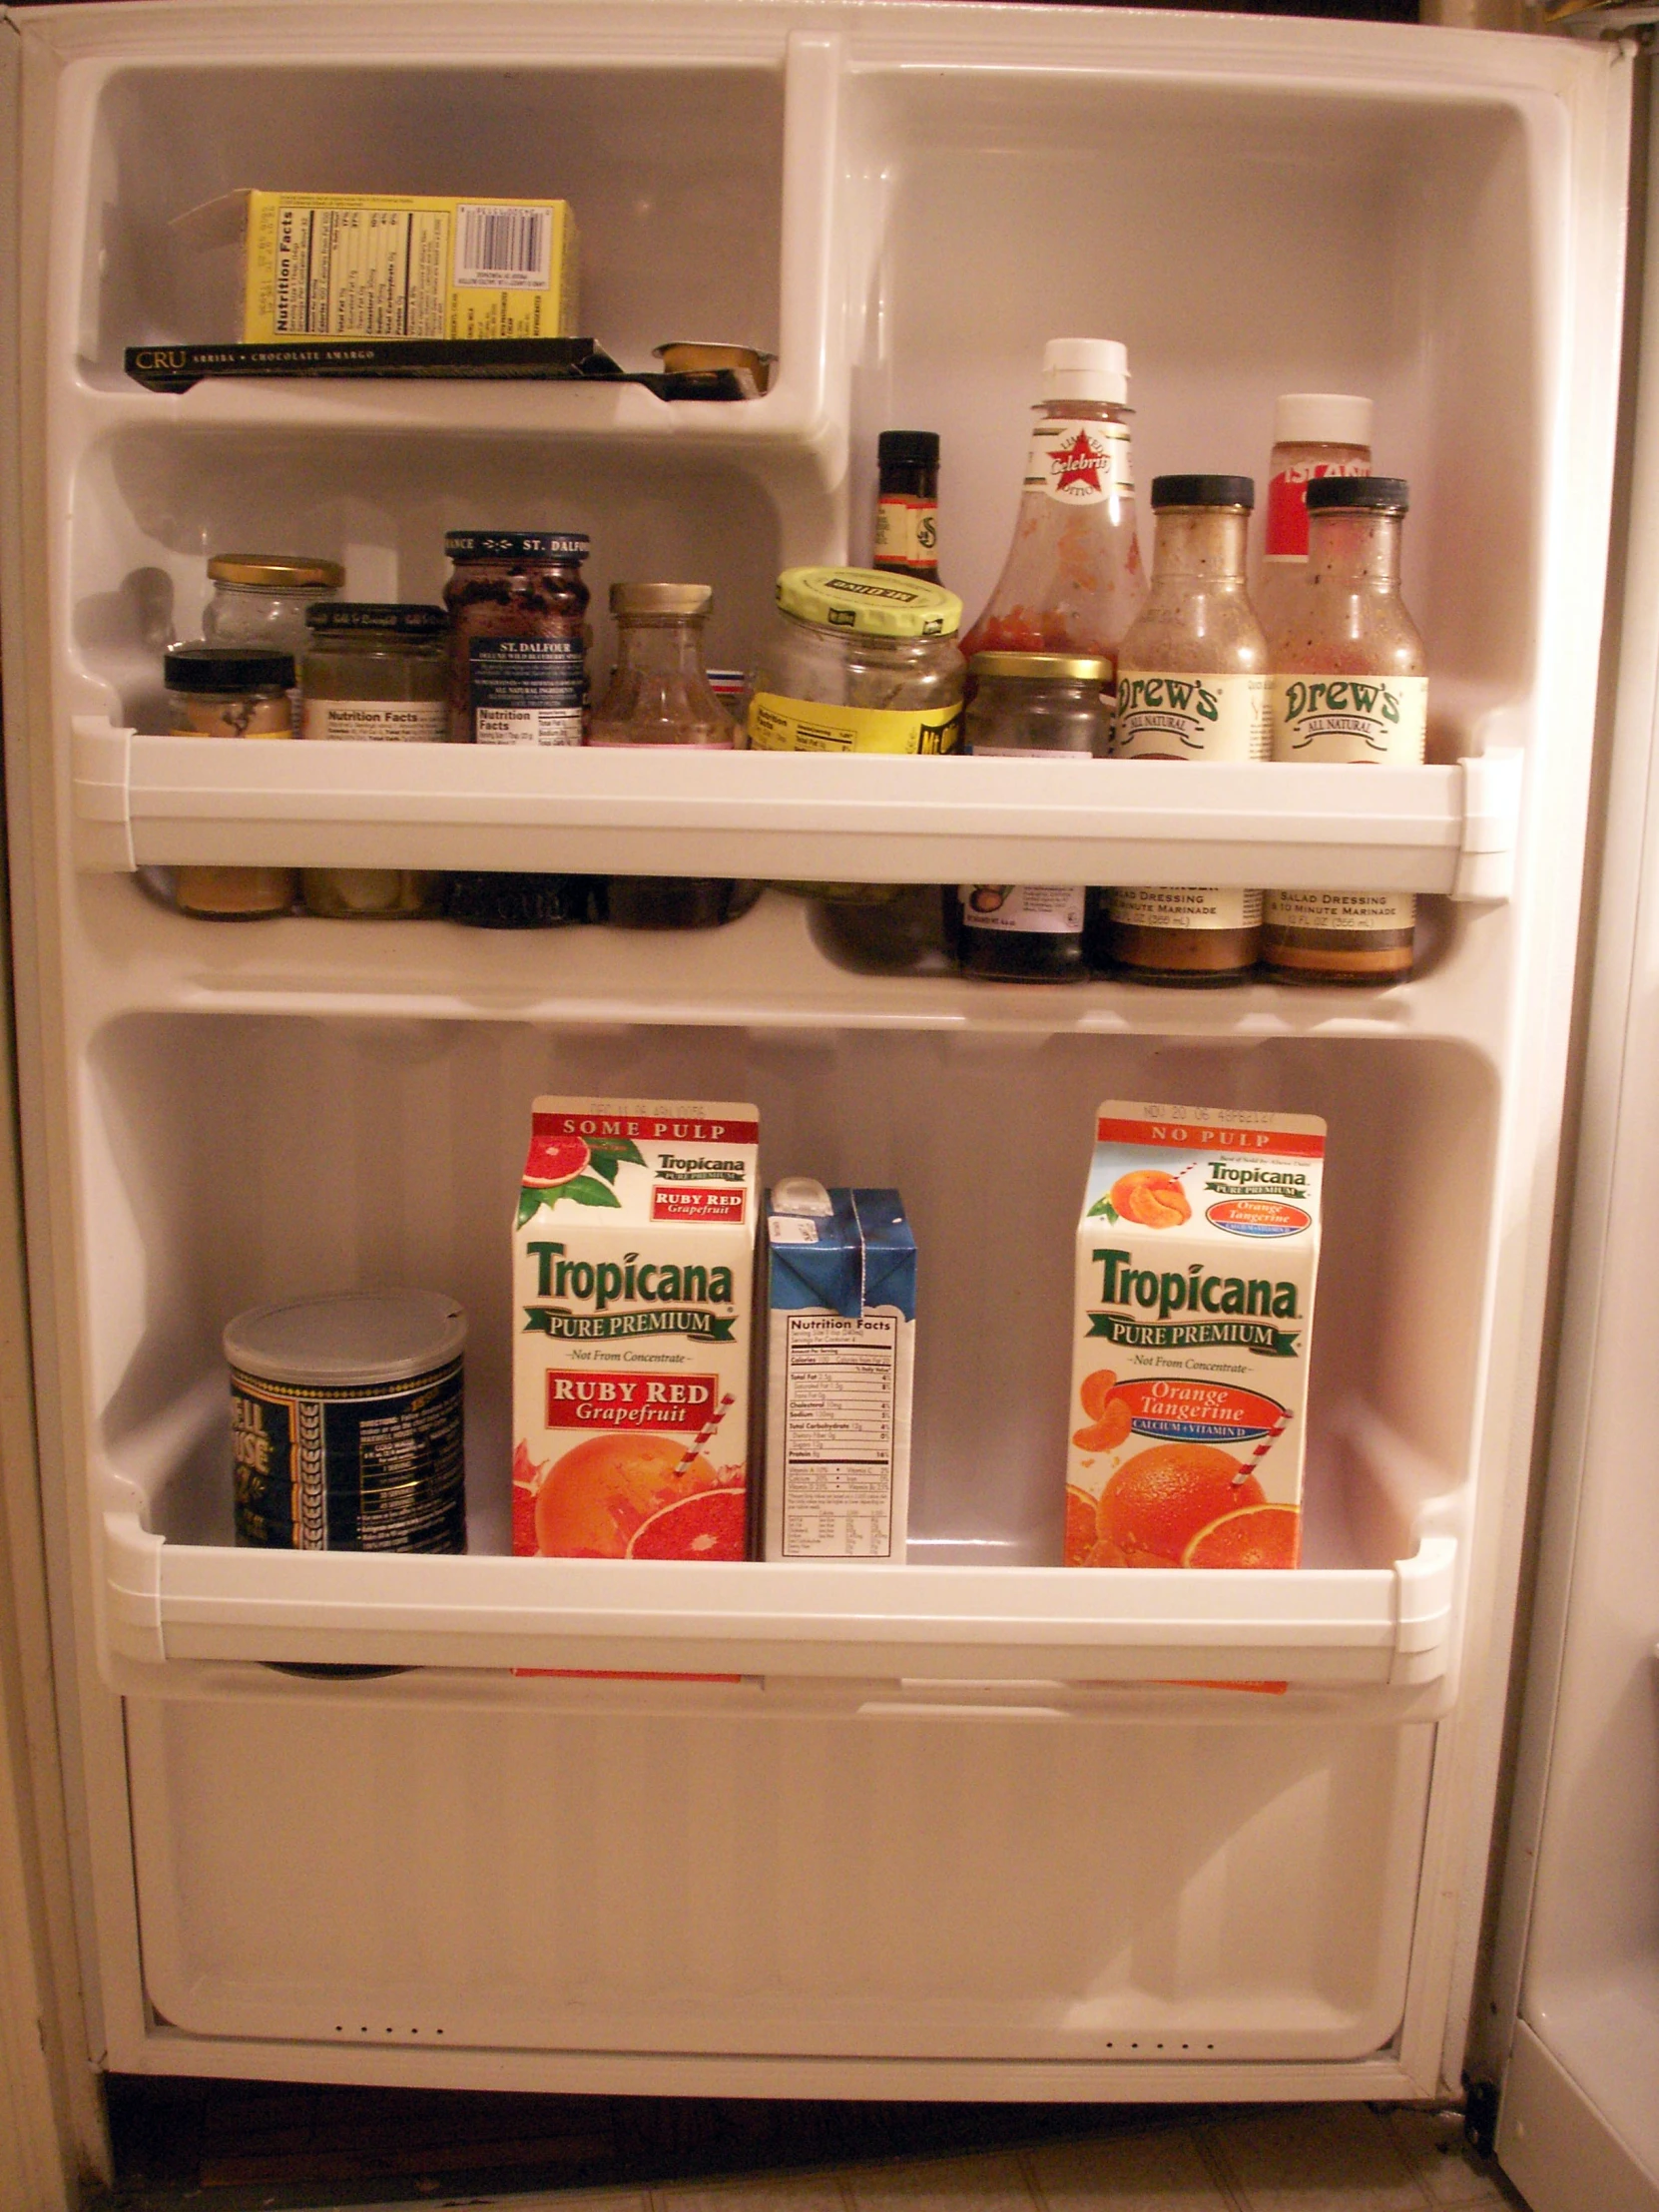 an open refrigerator has many different items in it